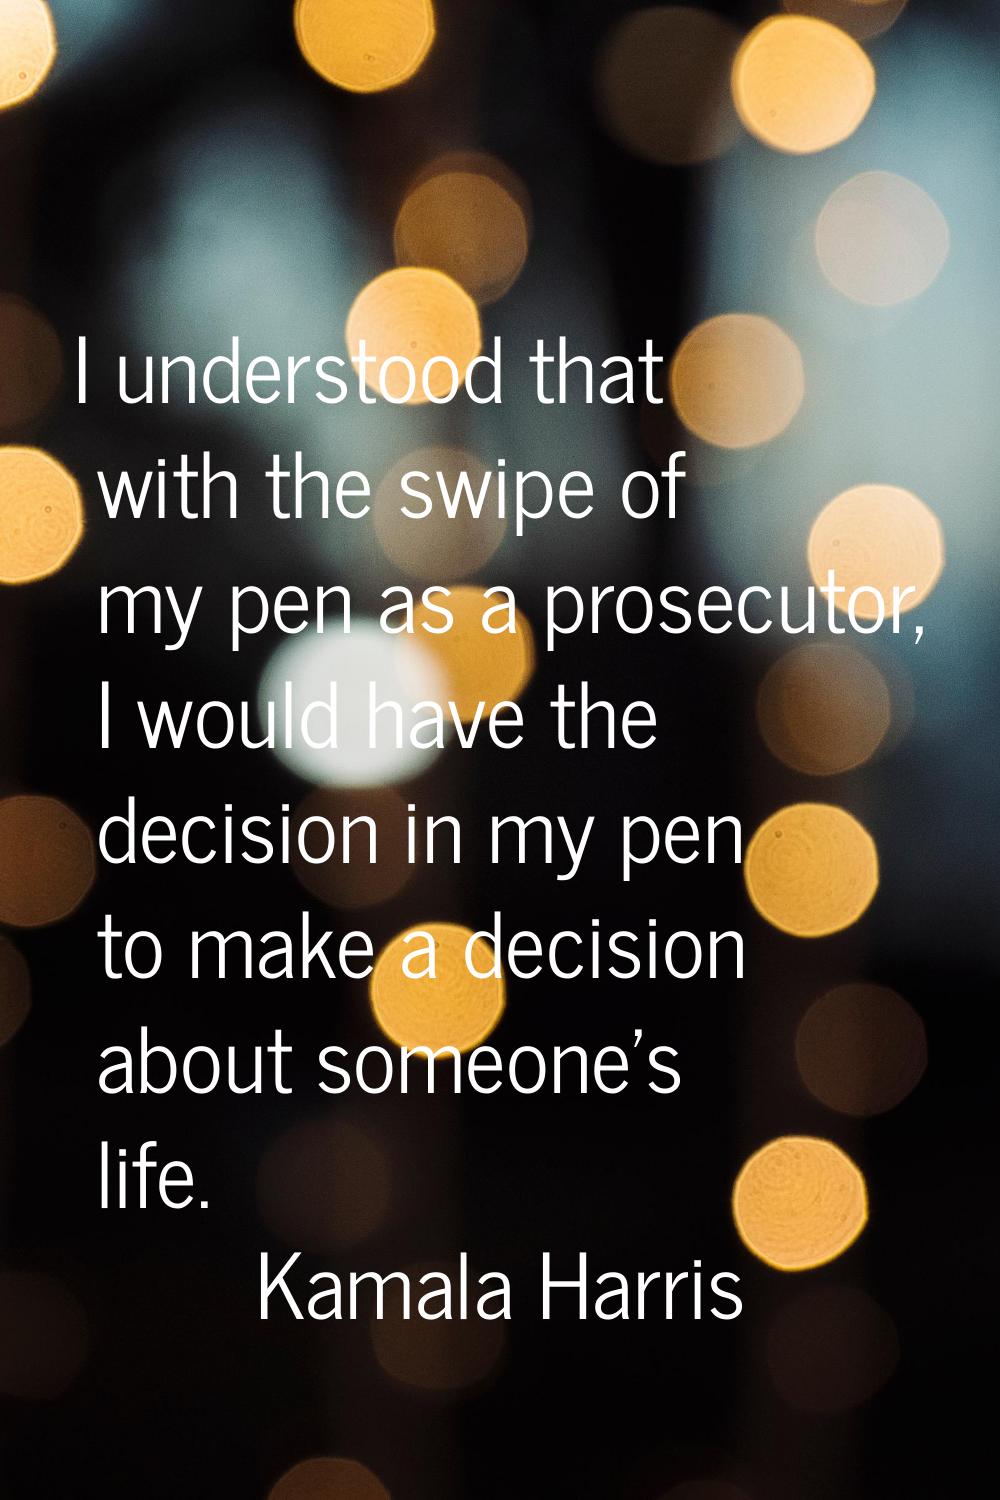 I understood that with the swipe of my pen as a prosecutor, I would have the decision in my pen to 